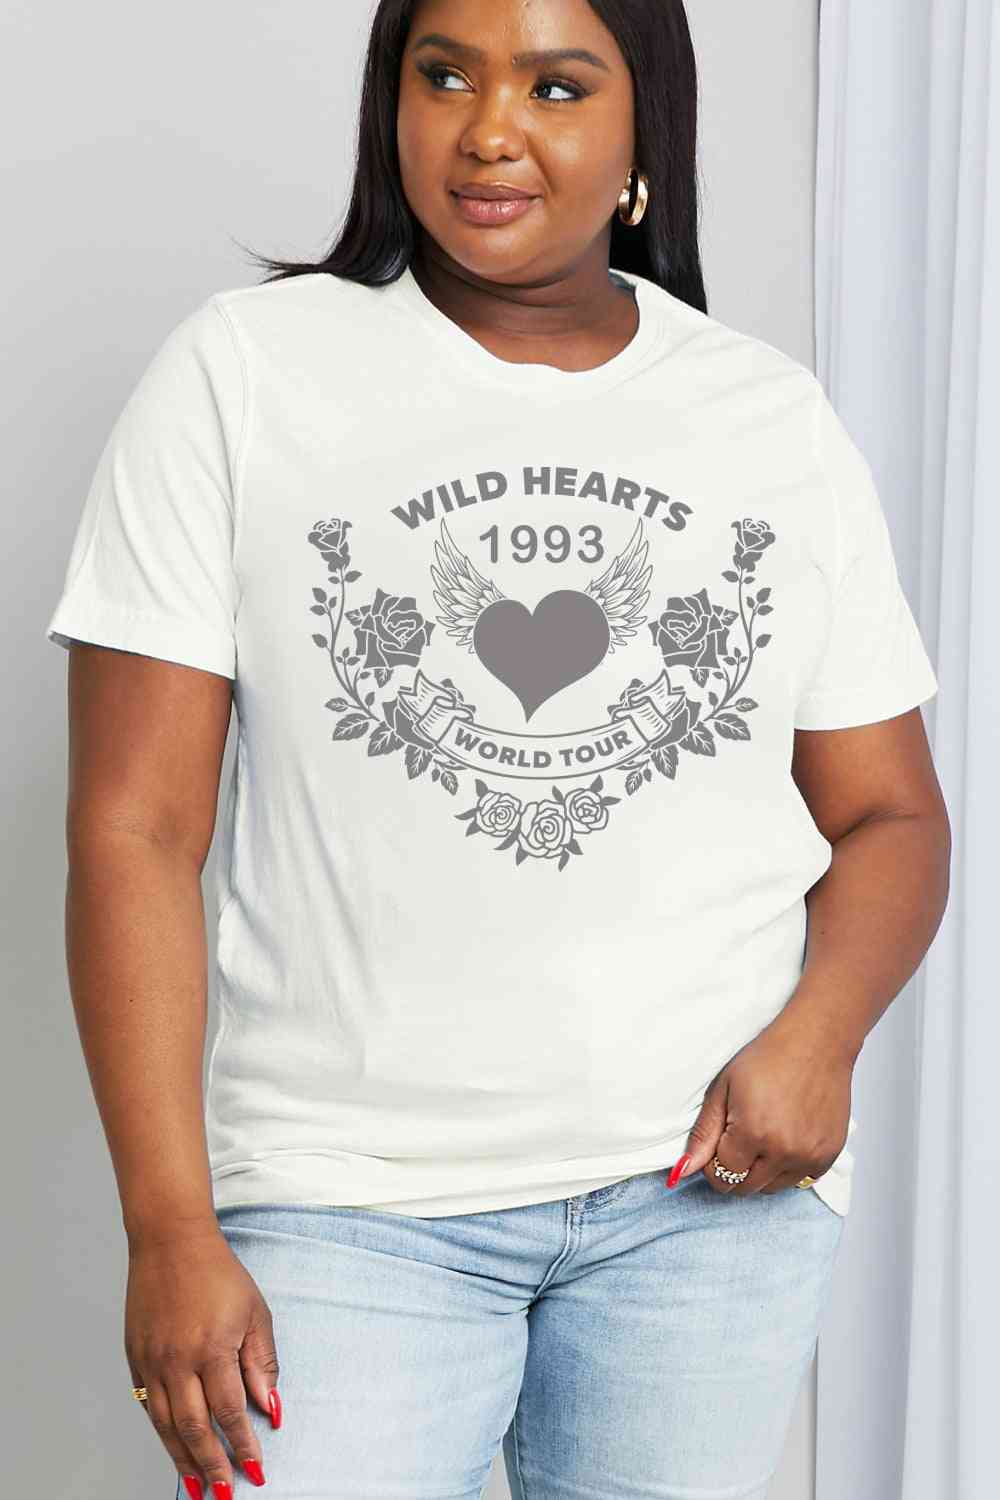 Simply Love Full Size WILD HEARTS 1993 WORLD TOUR Graphic Cotton Tee Bleach